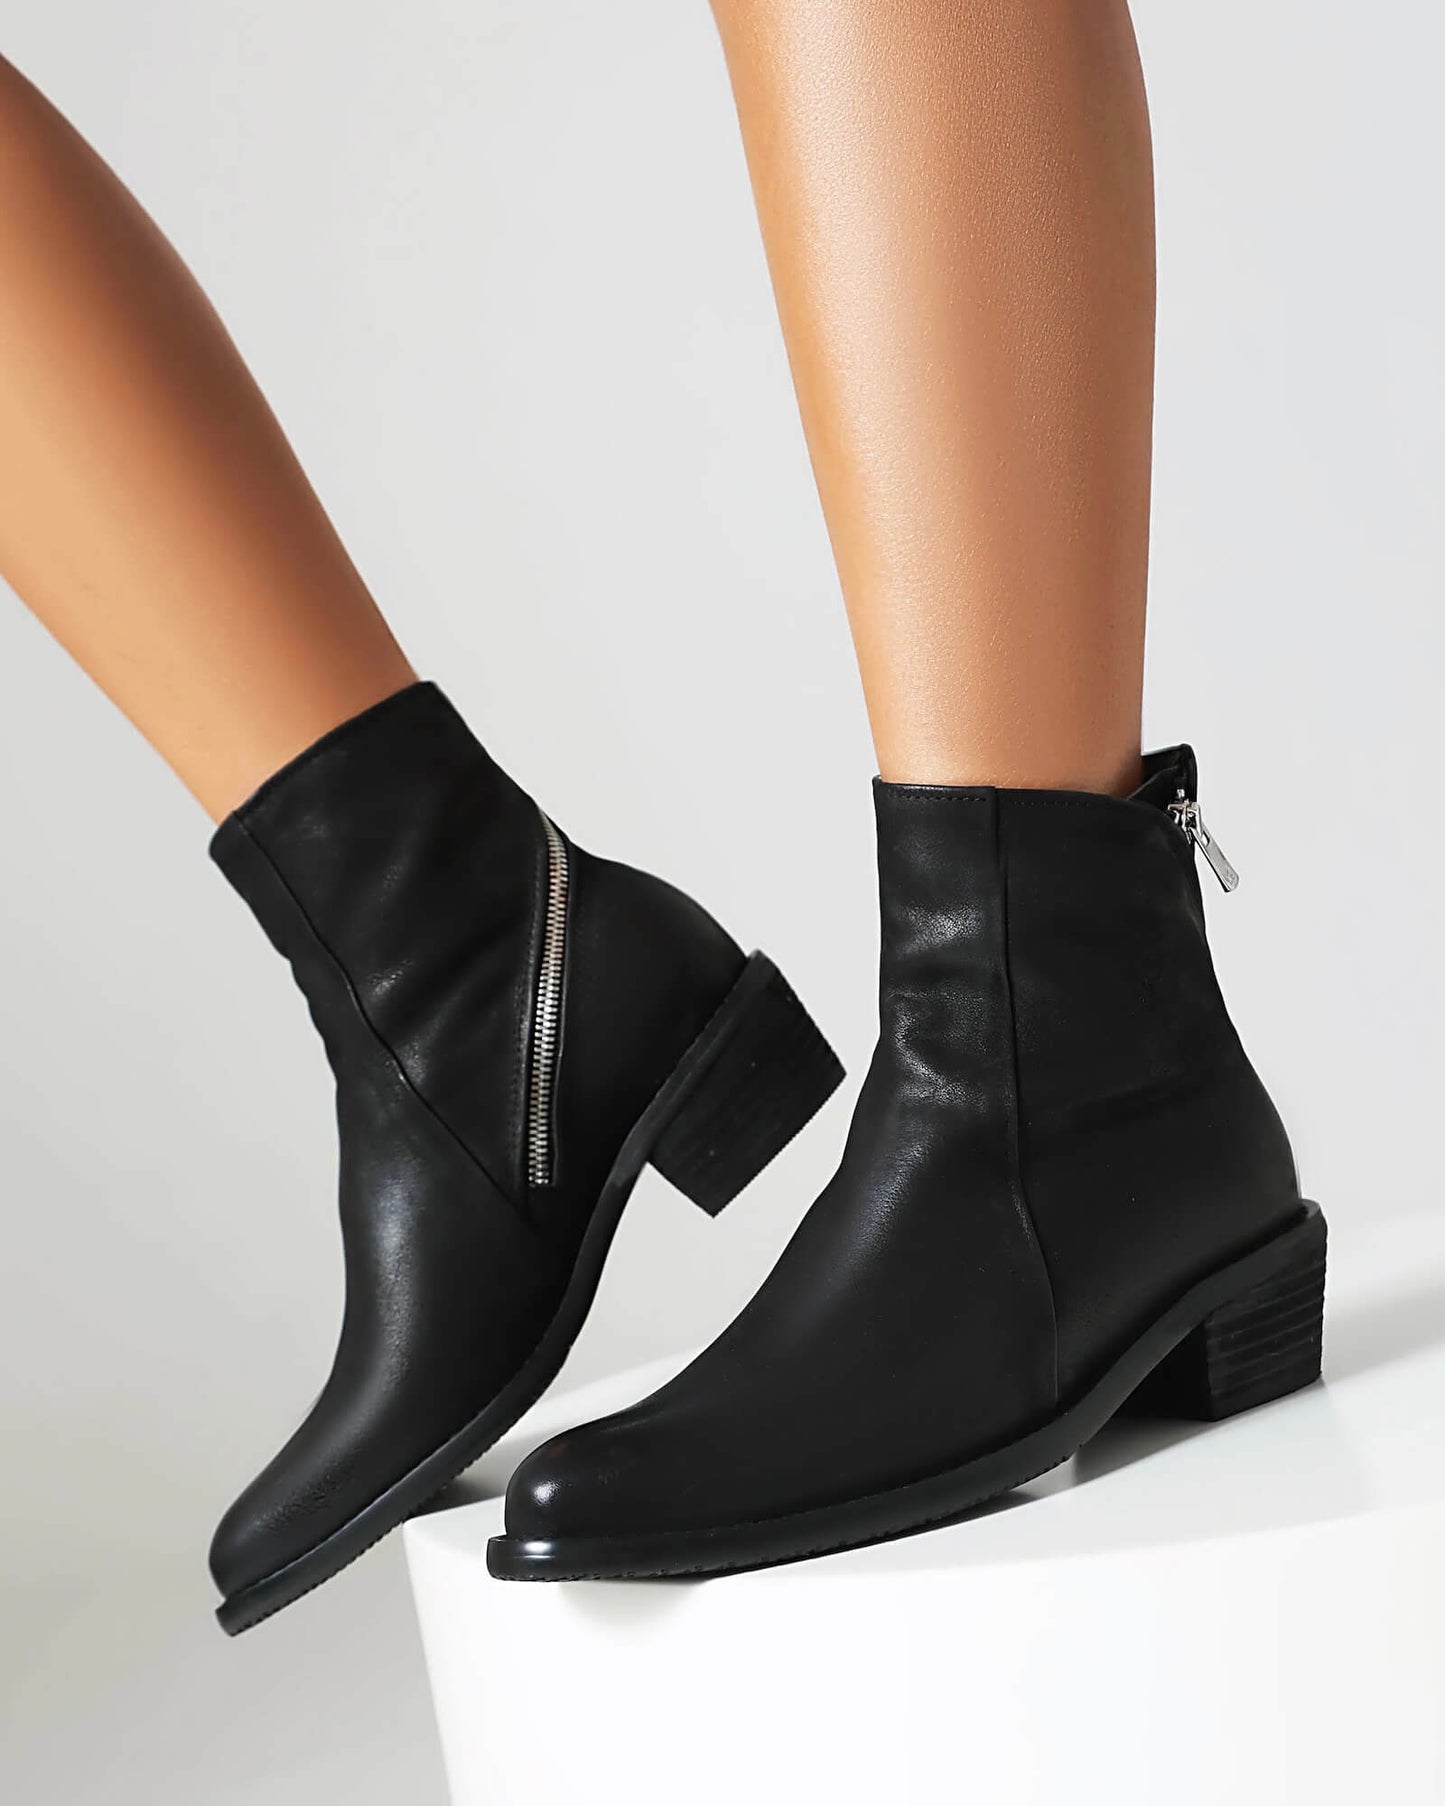 321-black-leather-pointed-toe-boots-model